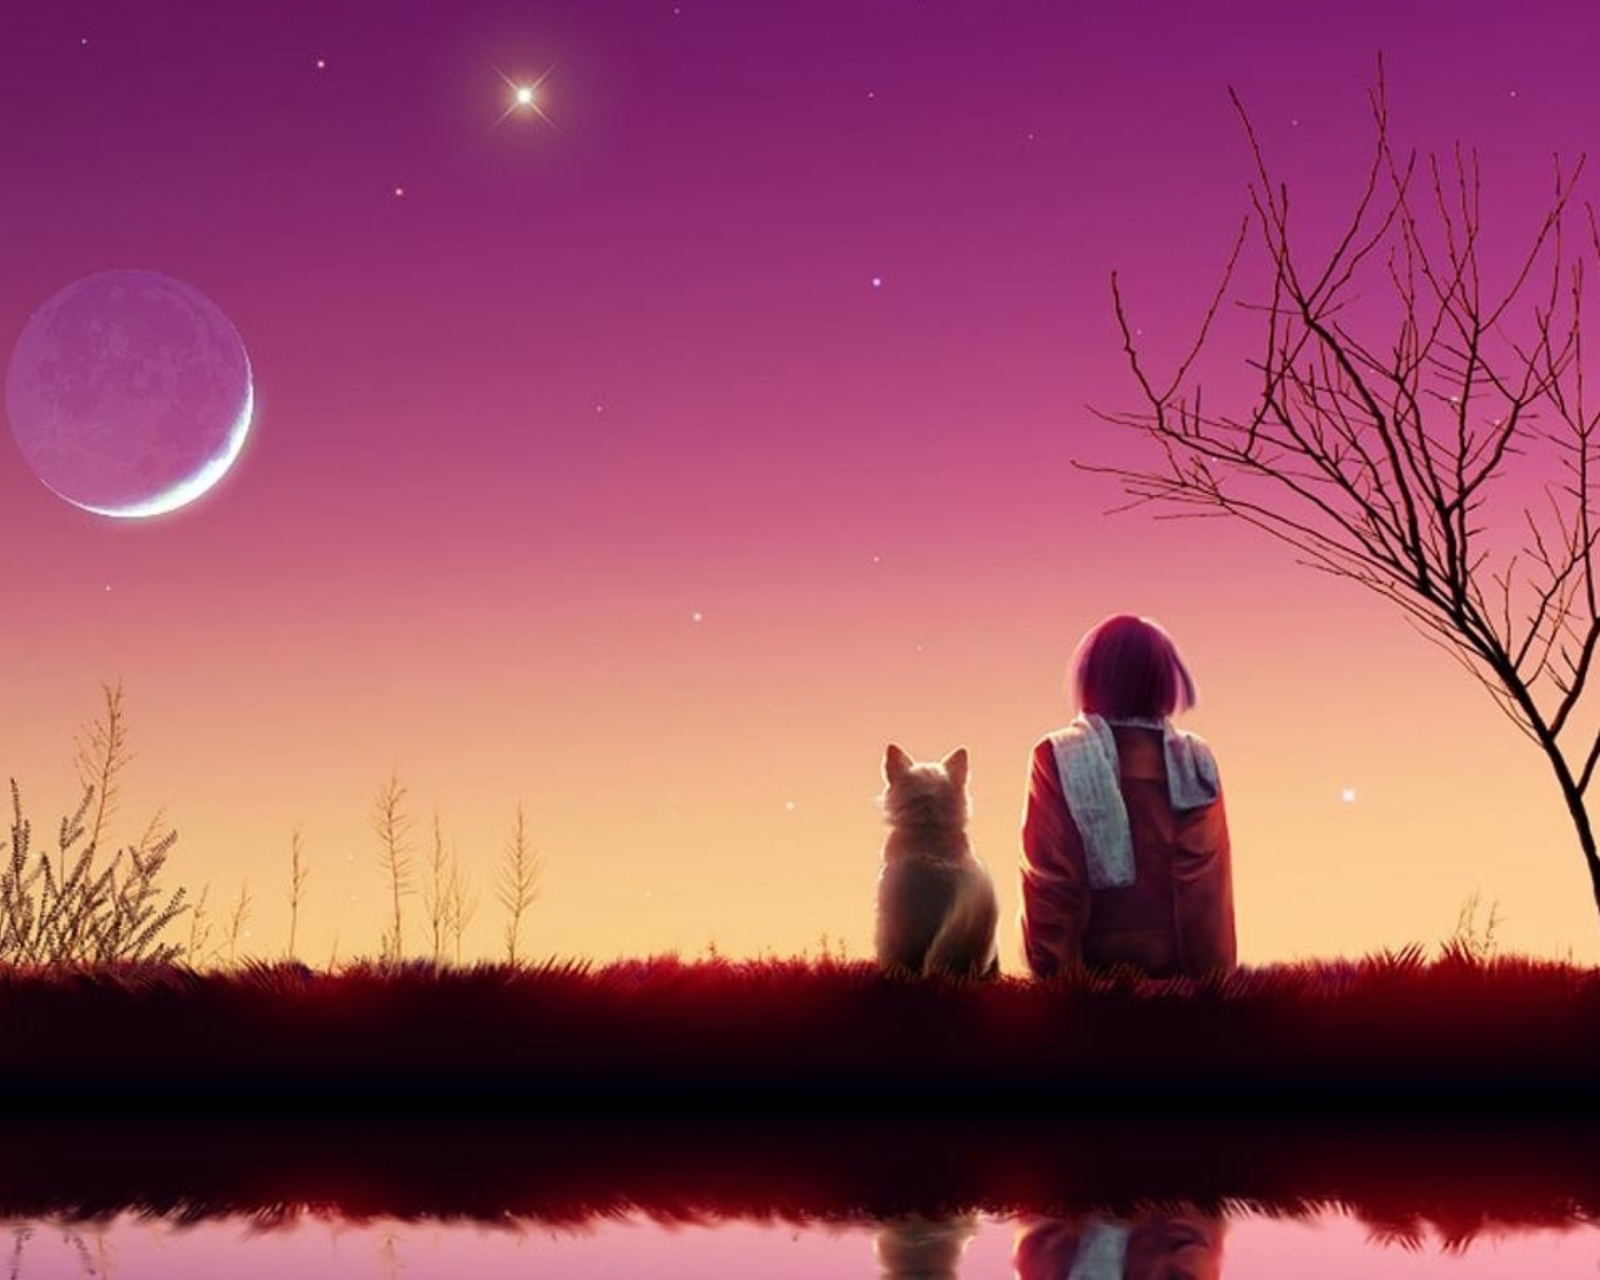 Girl And Cat Looking At Pink Sky wallpaper 1600x1280